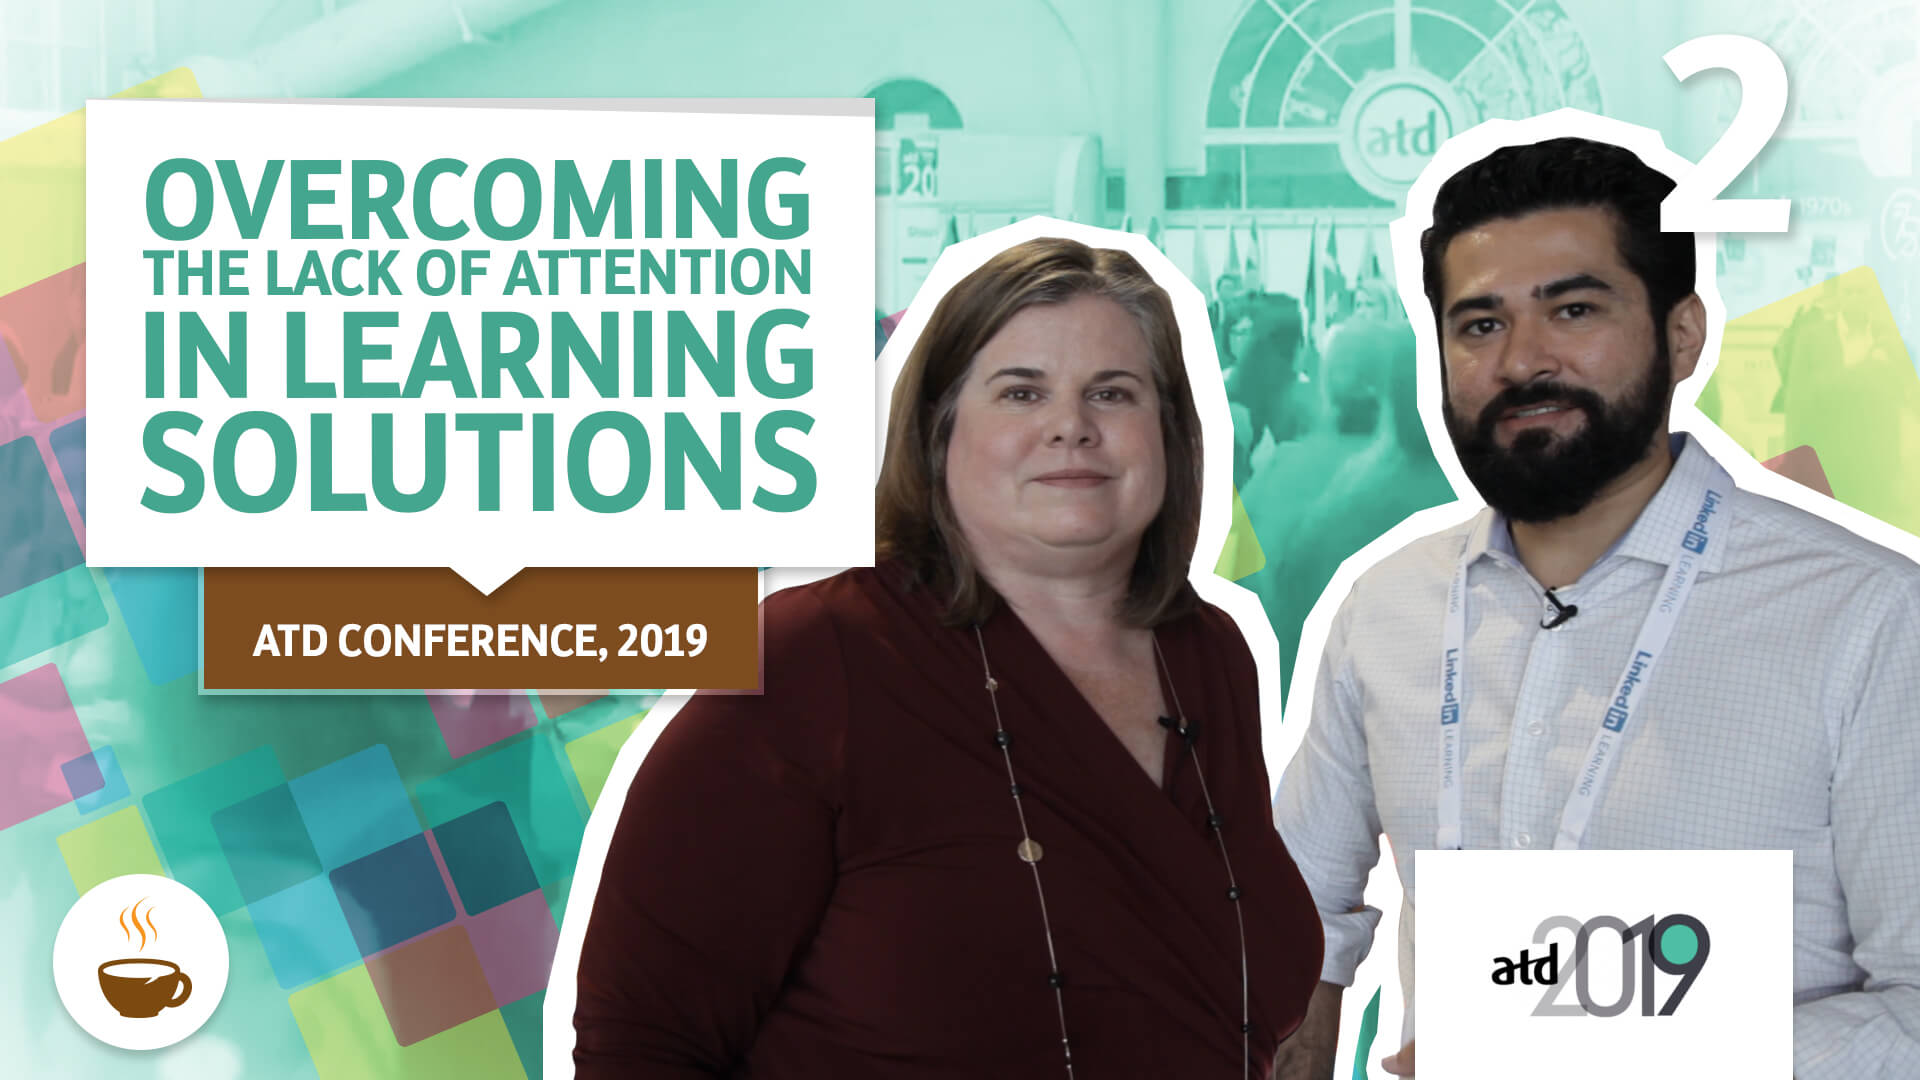 Wagner Cassimiro interviews Julie about Overcoming the lack of attention in leaning solutions - ATD Conference, 2019 